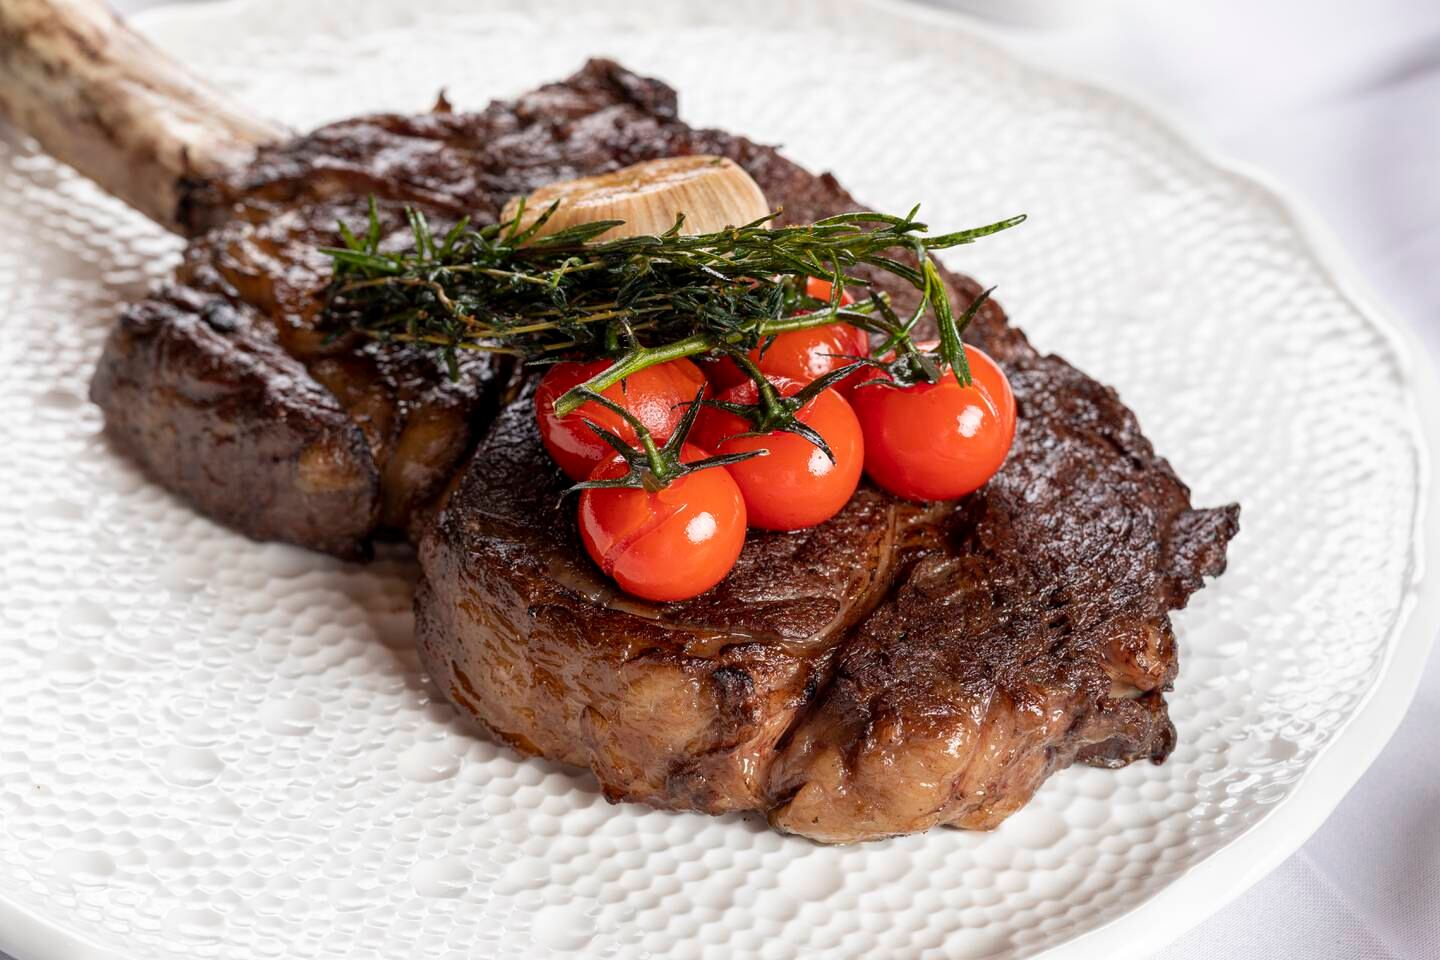 Meat lovers have various steak options to choose from. Photo: Belgravian Brasserie